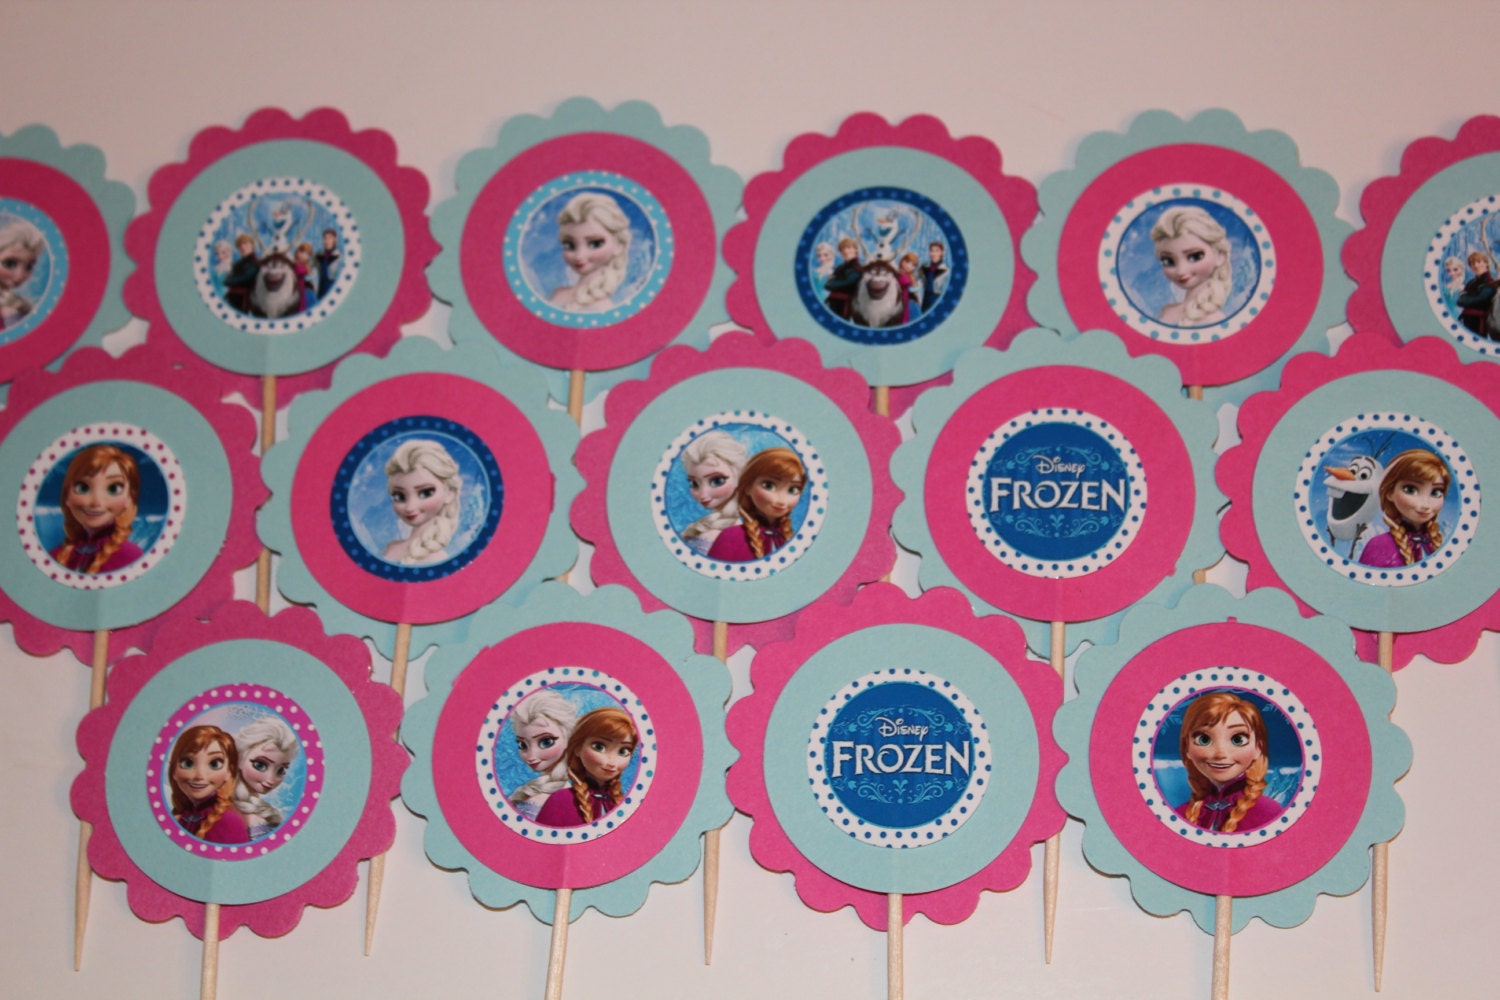 Frozen Inspired Cupcake Toppers - set of 24